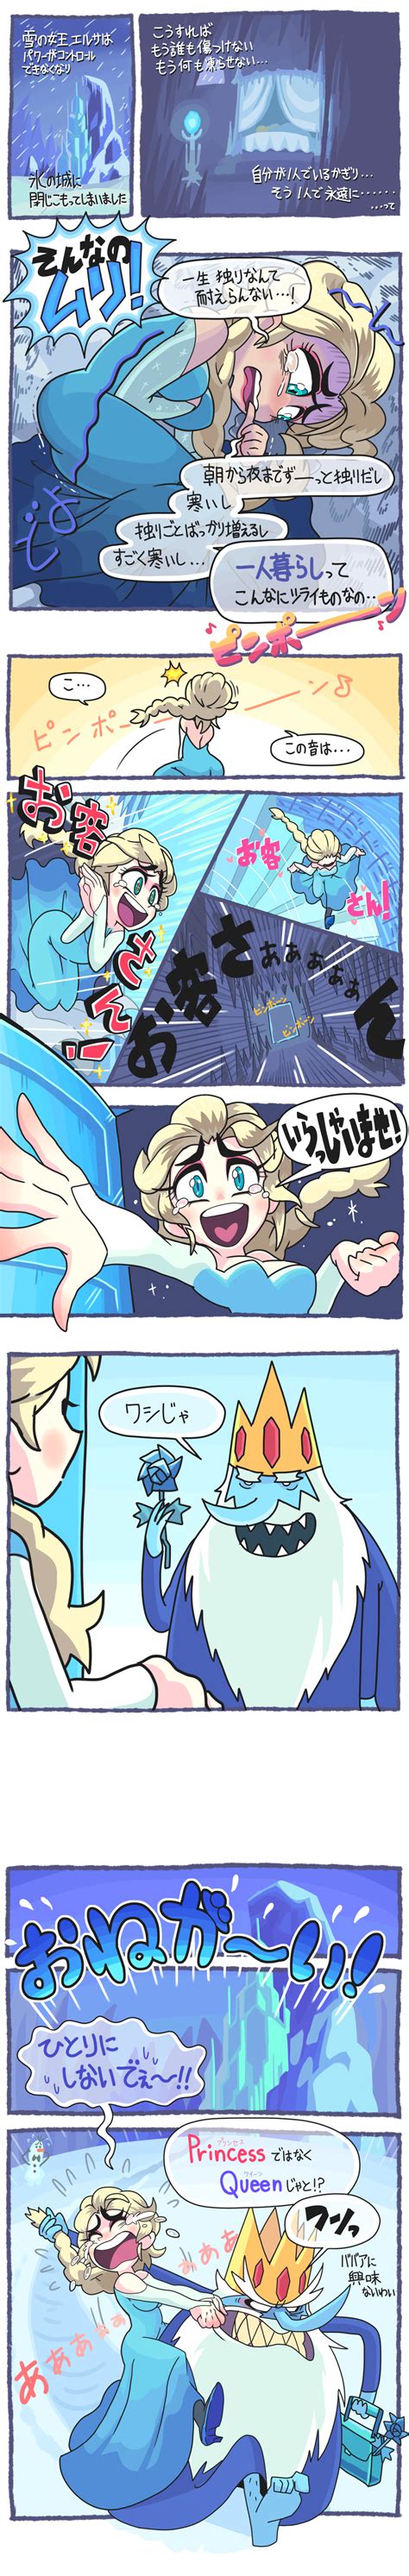 Elsa Olaf And Ice King Frozen And 1 More Drawn By